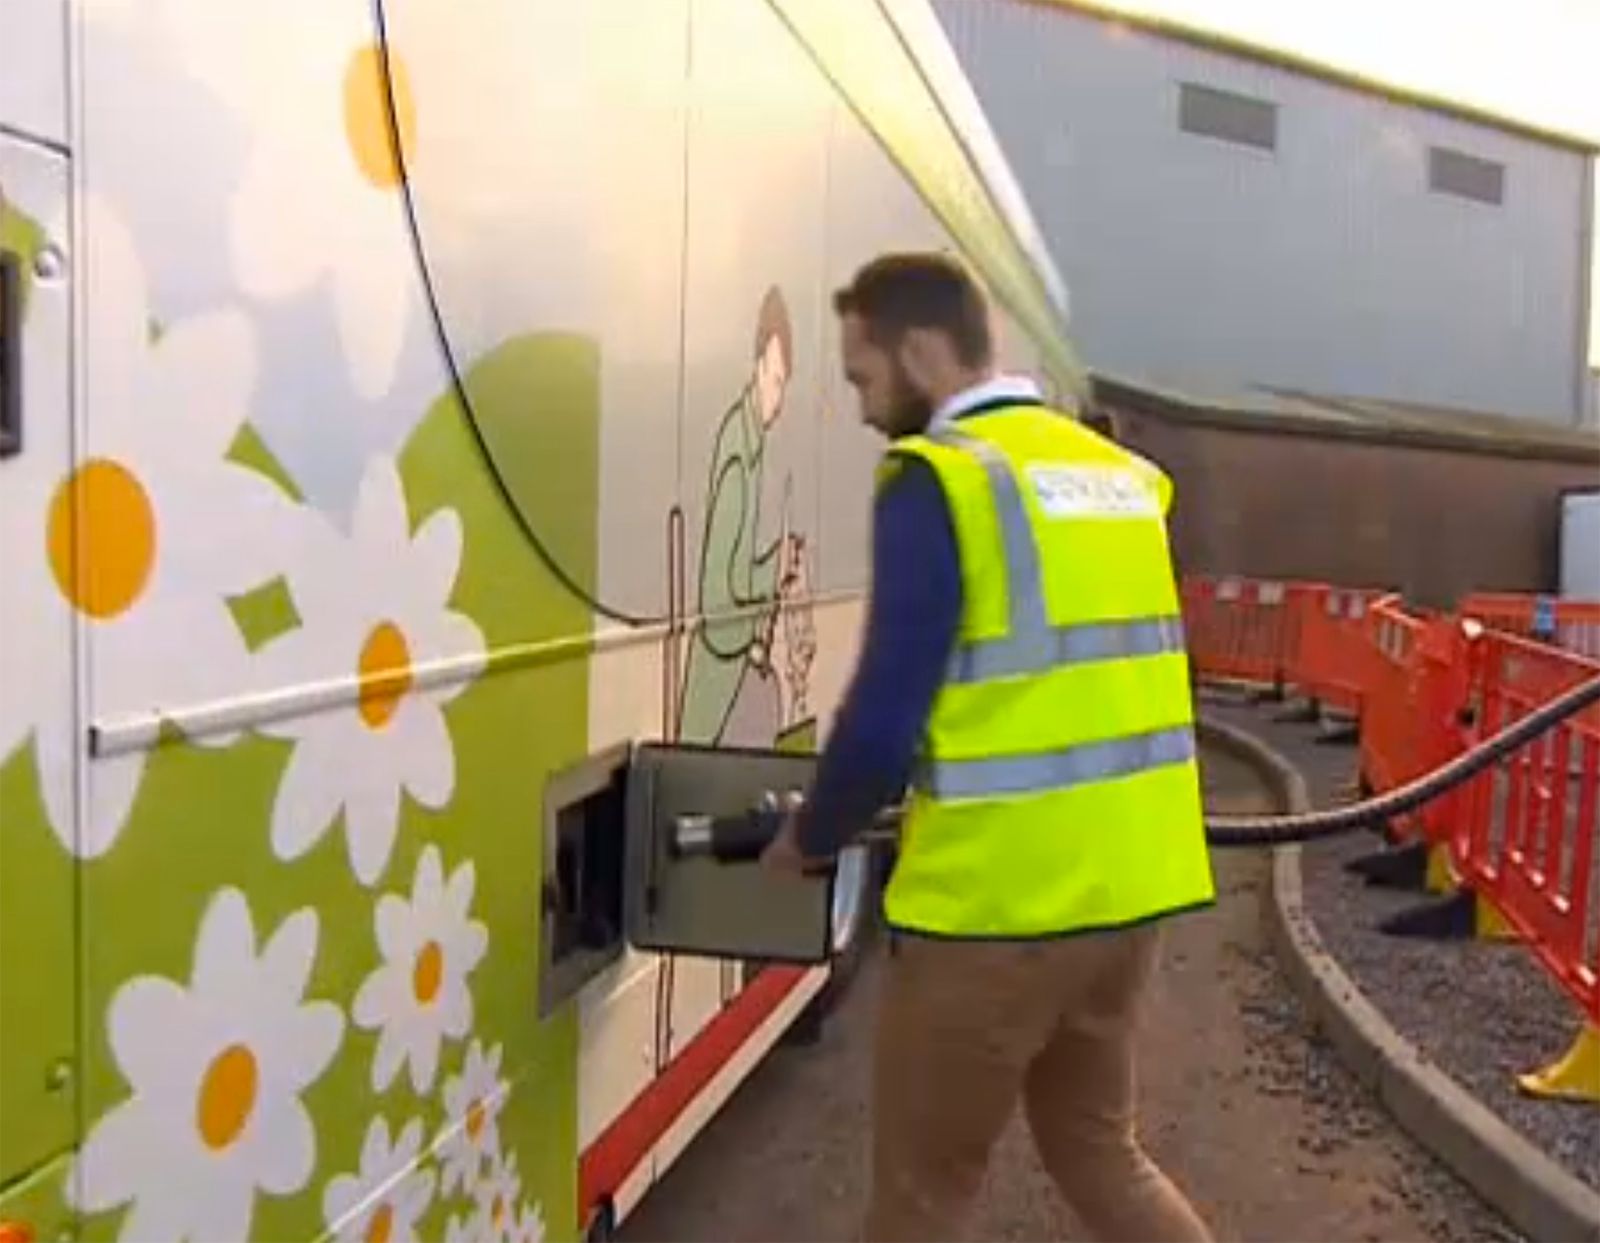 bio bus powered entirely by human waste now running in the uk image 4